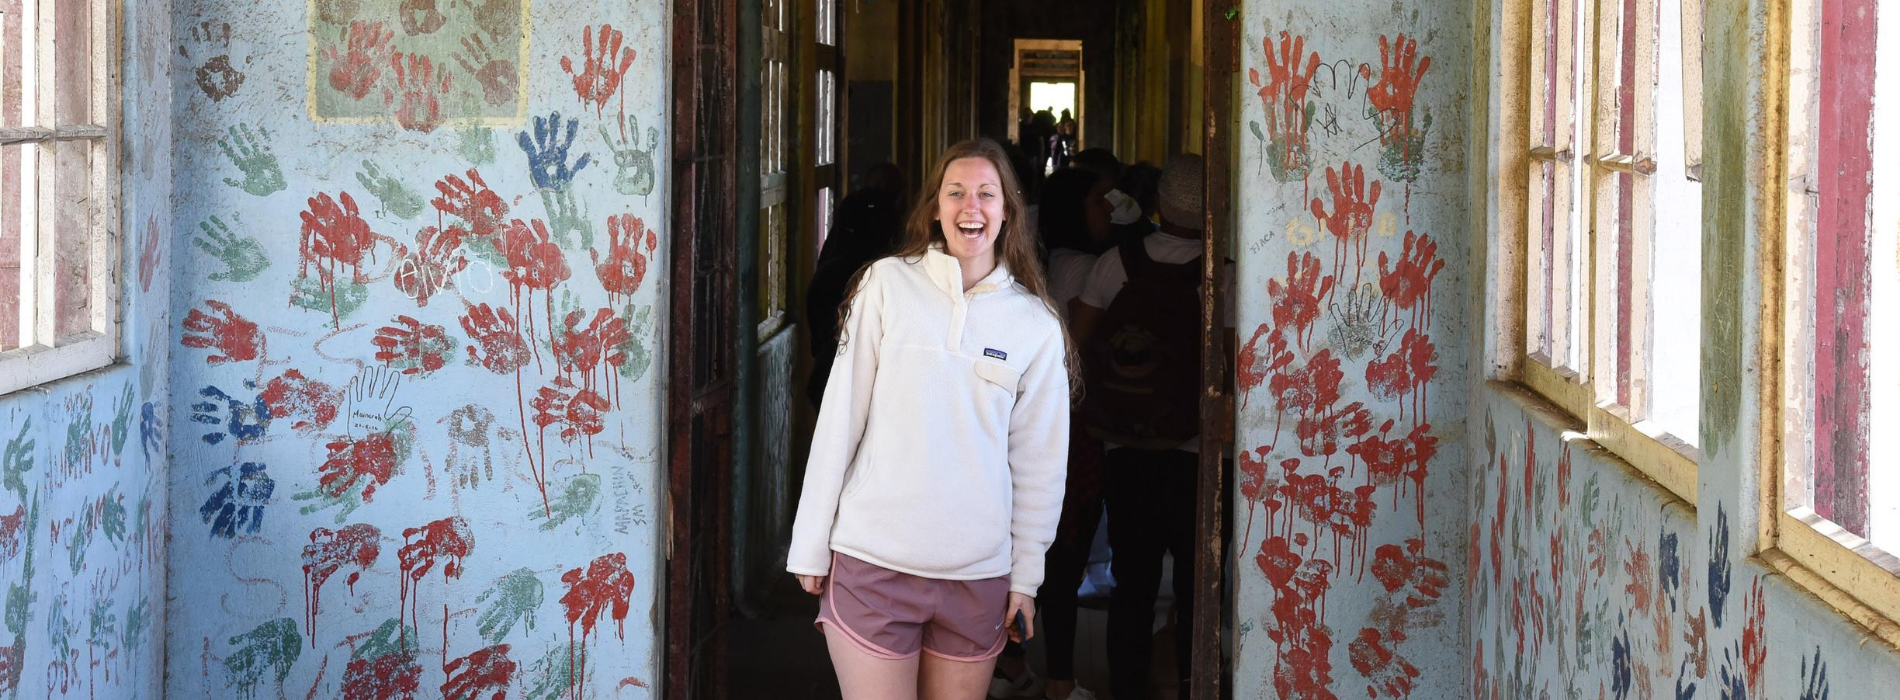 A student smiles brightly at the camera, standing in a building painted with handprints on a study abroad trip. 